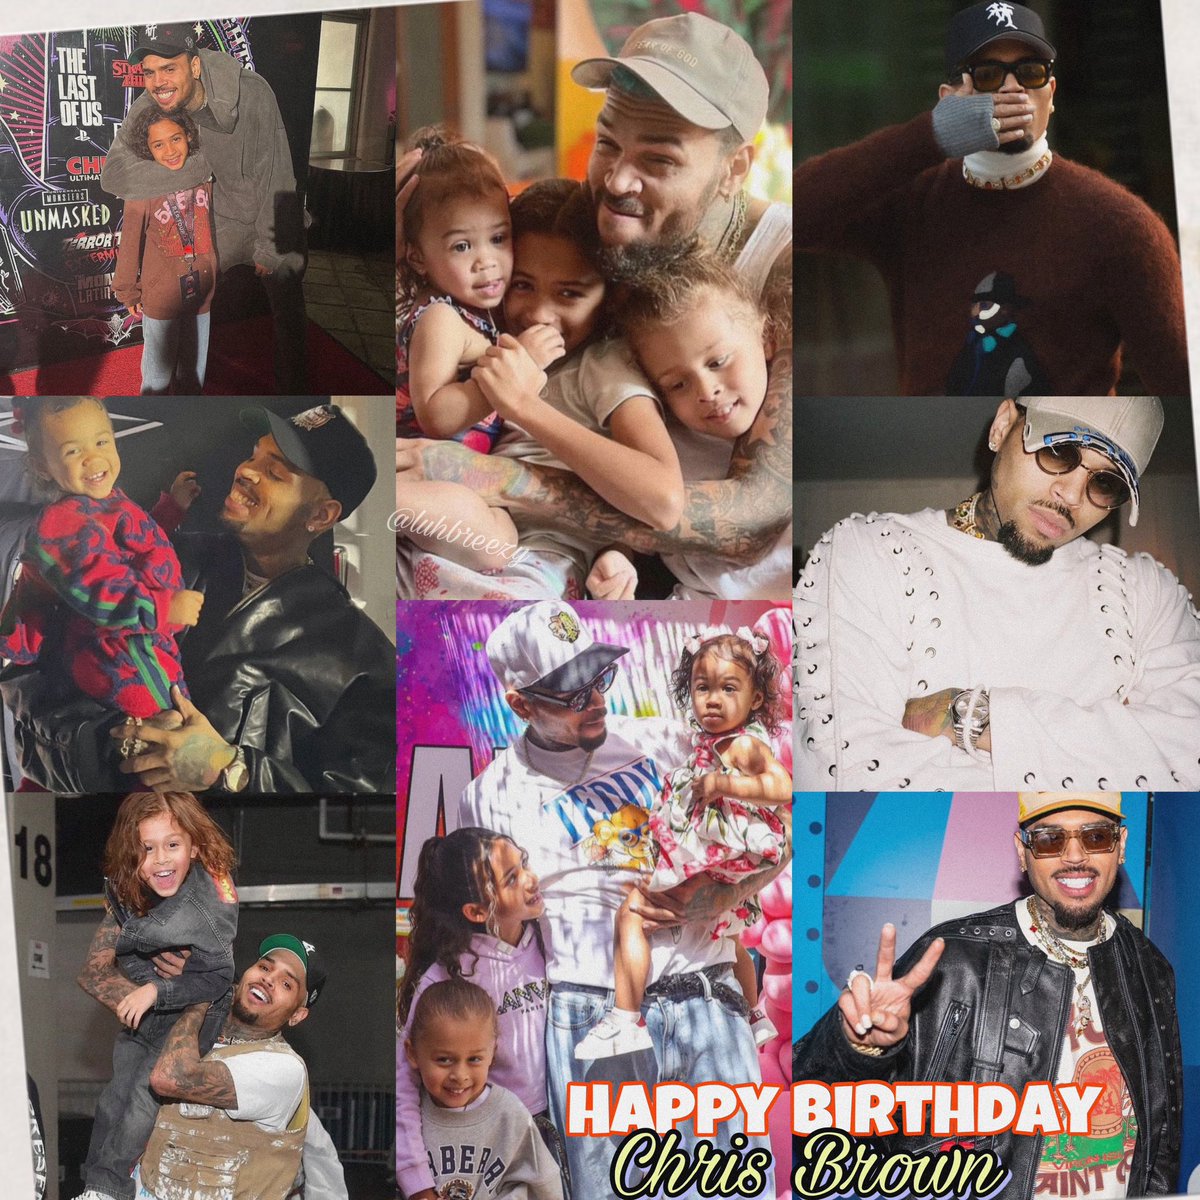 Happy Birthday Chris Brown 🎊😘🥳💕
I wish you all the best in your life, may you enjoy it today, with your family and friends.. CB always be this incredible and talented person, we are proud of you, I love you forever..  TeamBreezy For life✨
@chrisbrown 🎊🥹🫶❤️